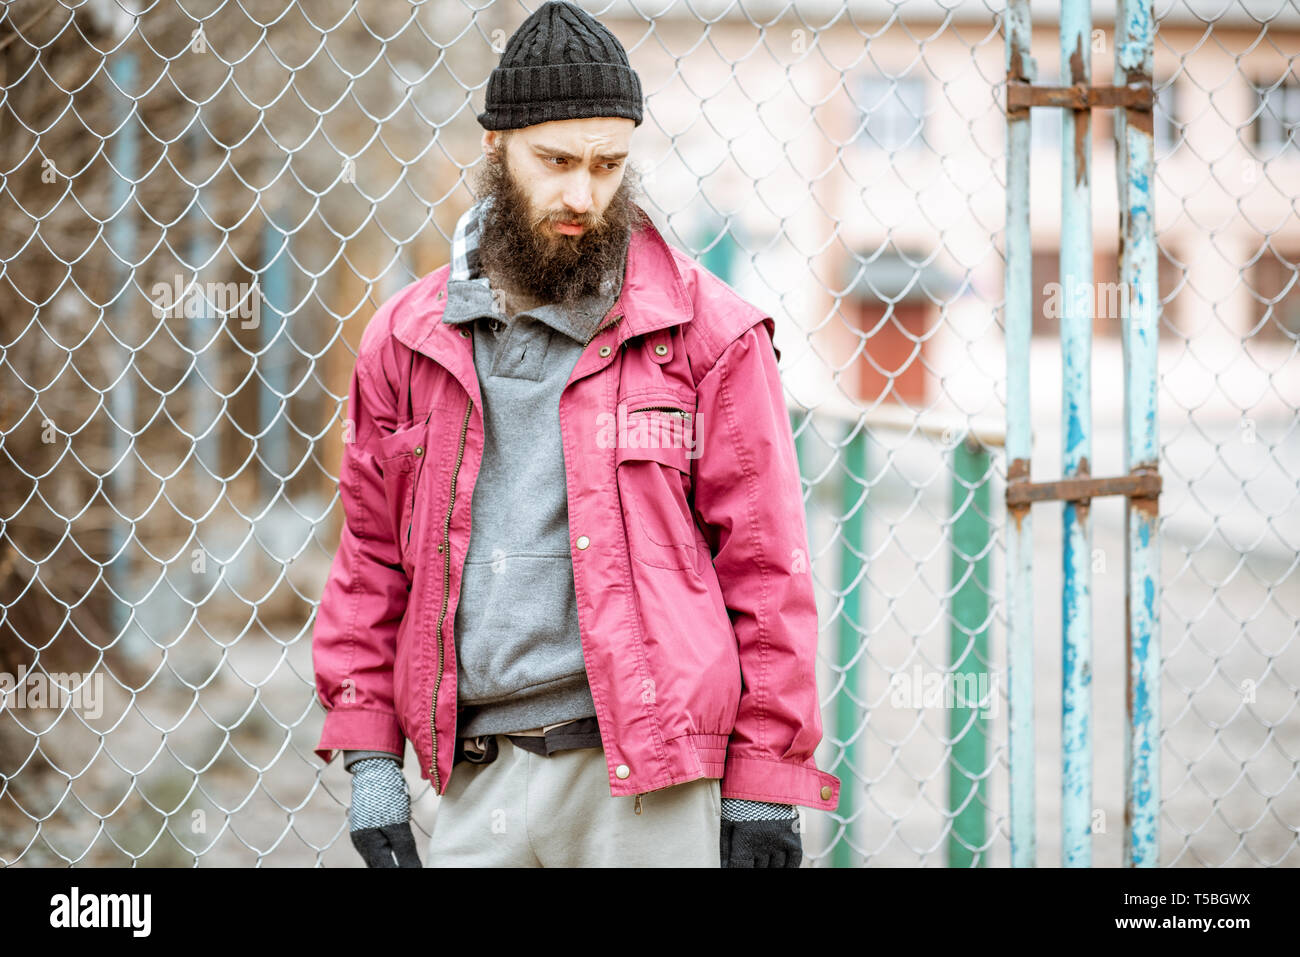 Portrait of a depressed homeless beggar or prisoner standing near the old metal fence outdoors Stock Photo